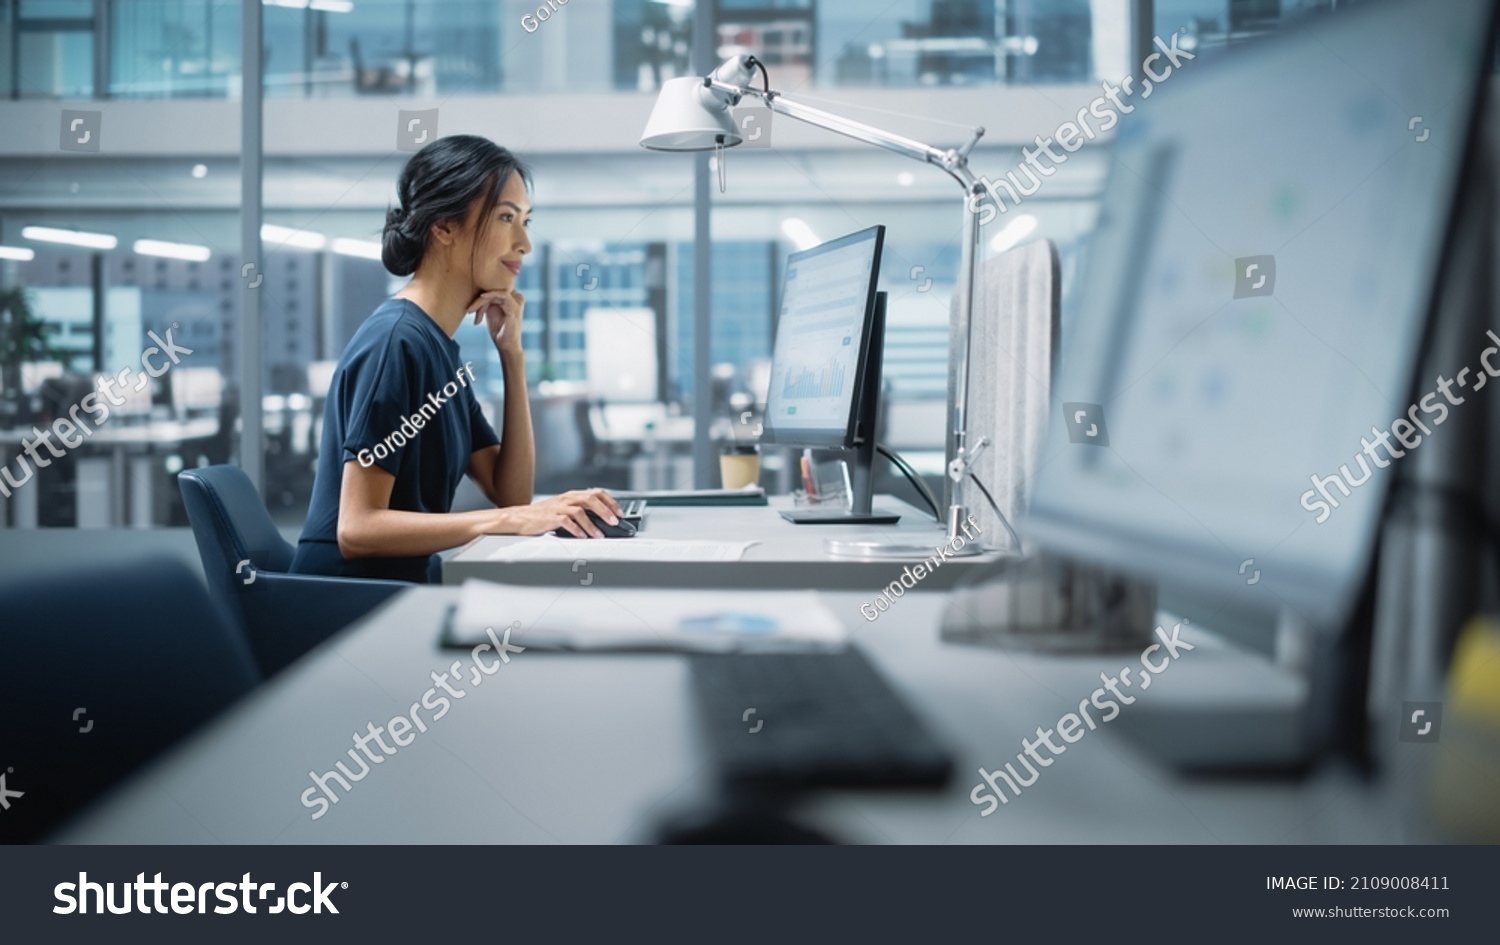 In Big Diverse Corporate Office: Portrait of Beautiful Asian Manager Using Desktop Computer, Businesswoman Managing Company Operations, Analysing Statistics, Commerce Data, Marketing Plans. #2109008411